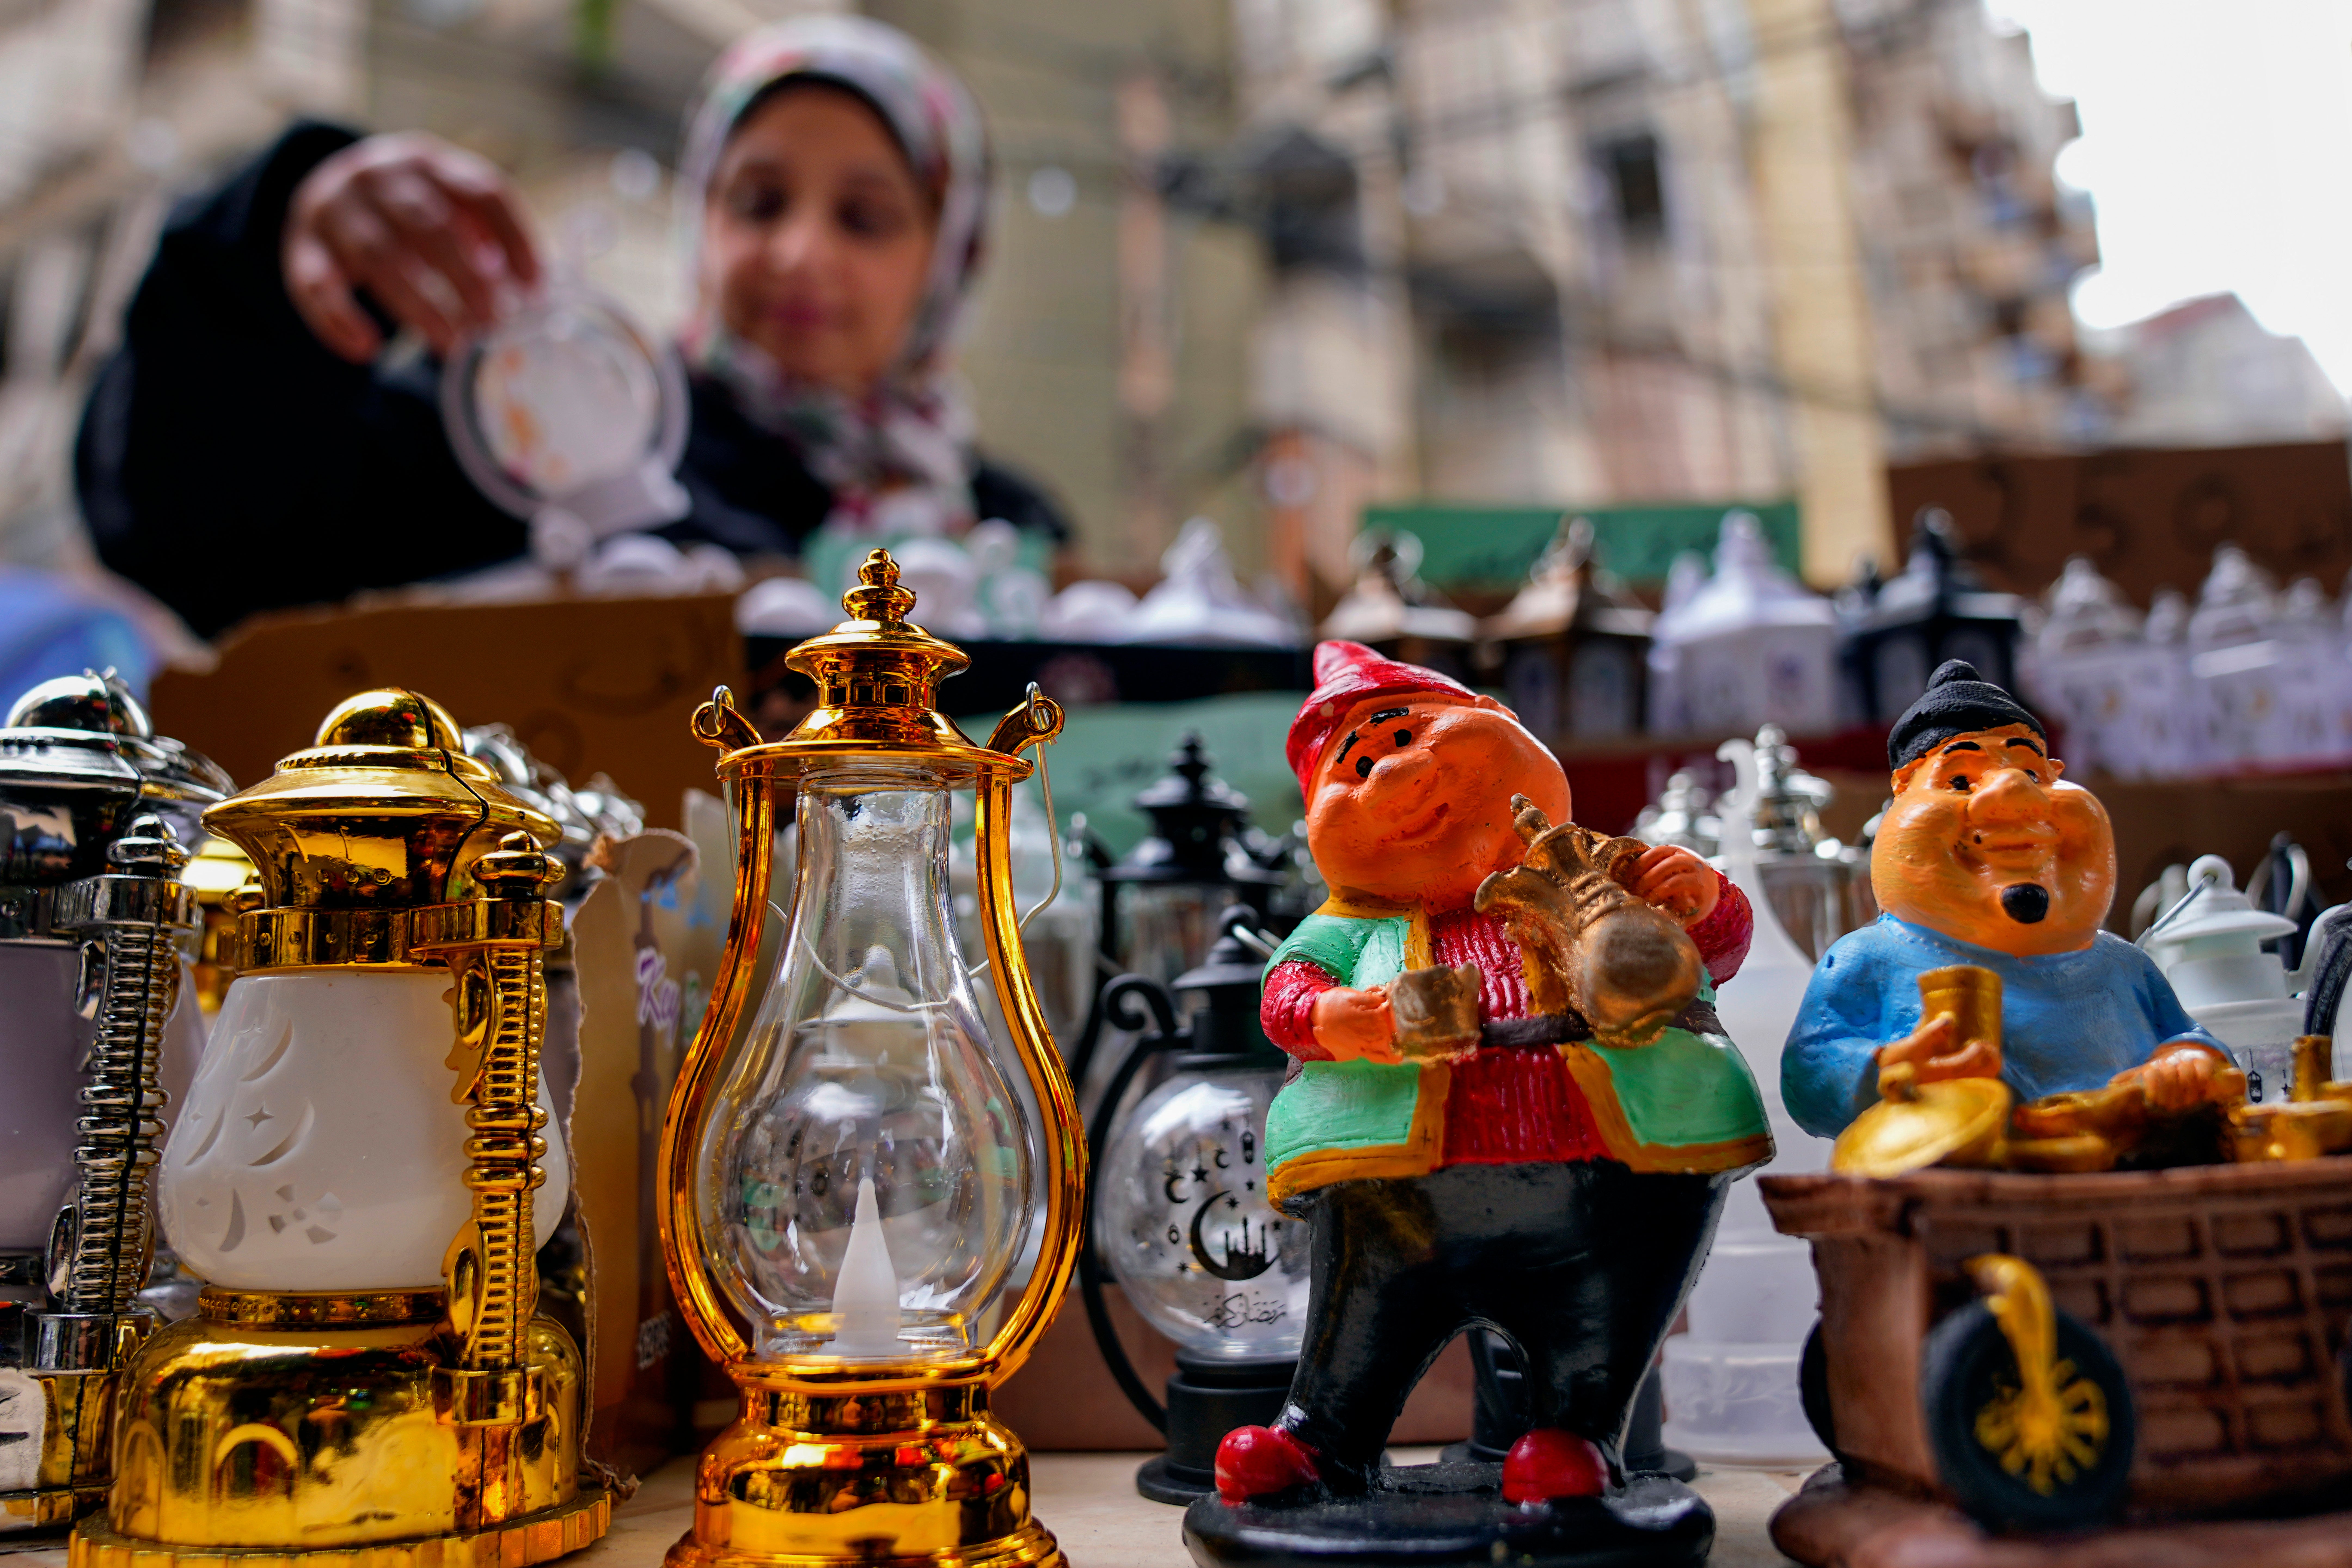 A woman shops for decorations for the Muslim holy month of Ramadan at a shop in Beirut, Lebanon